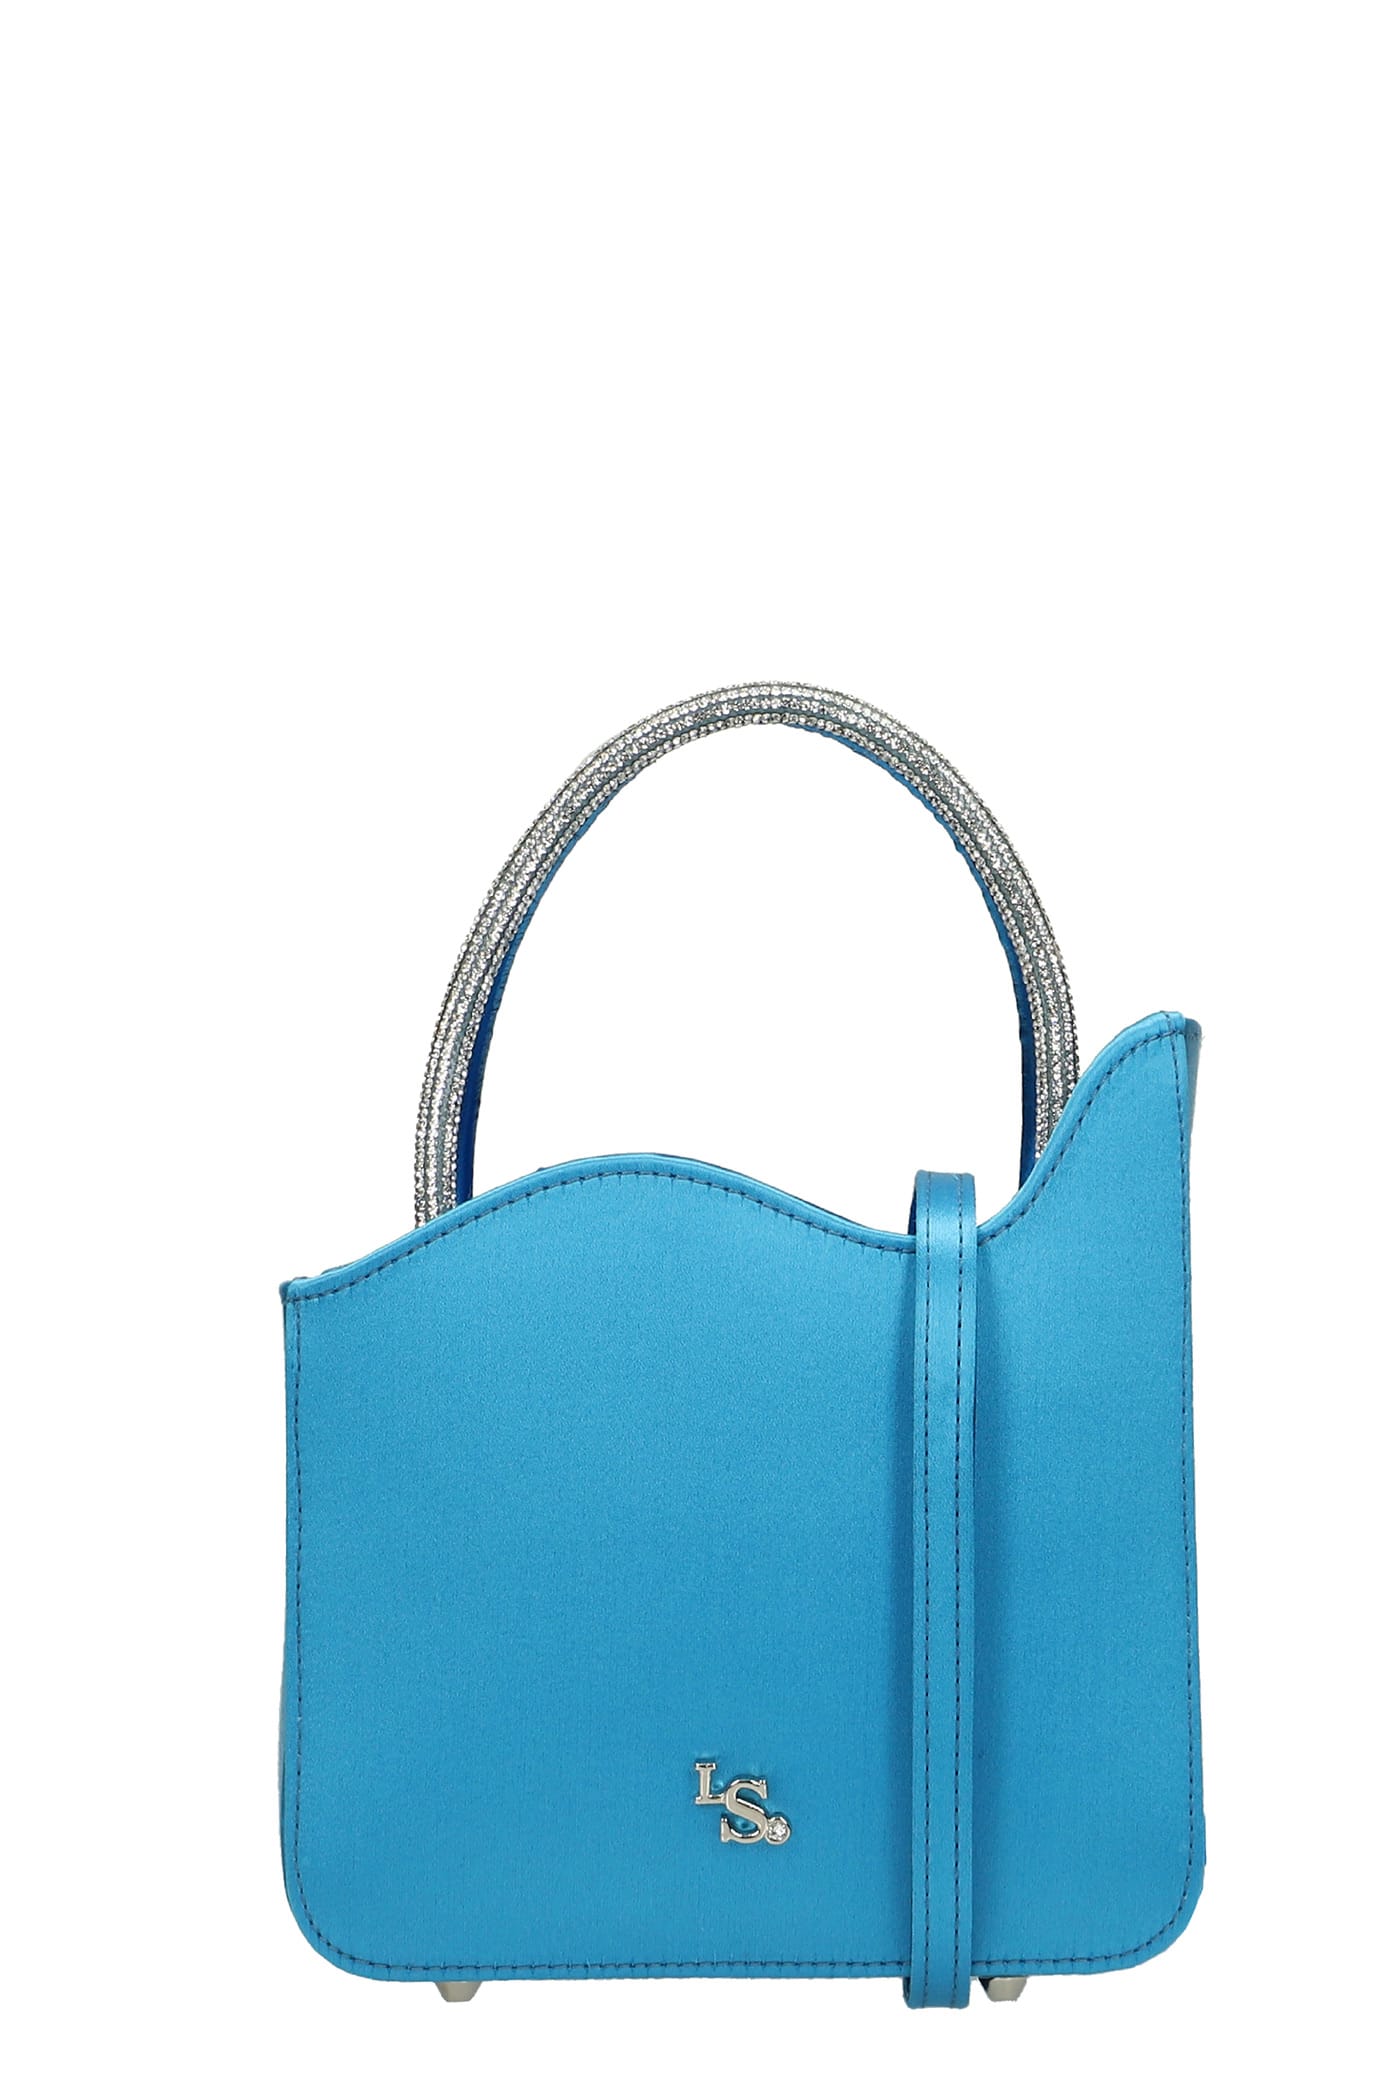 Le Silla Ivy Hand Bag In Cyan Leather